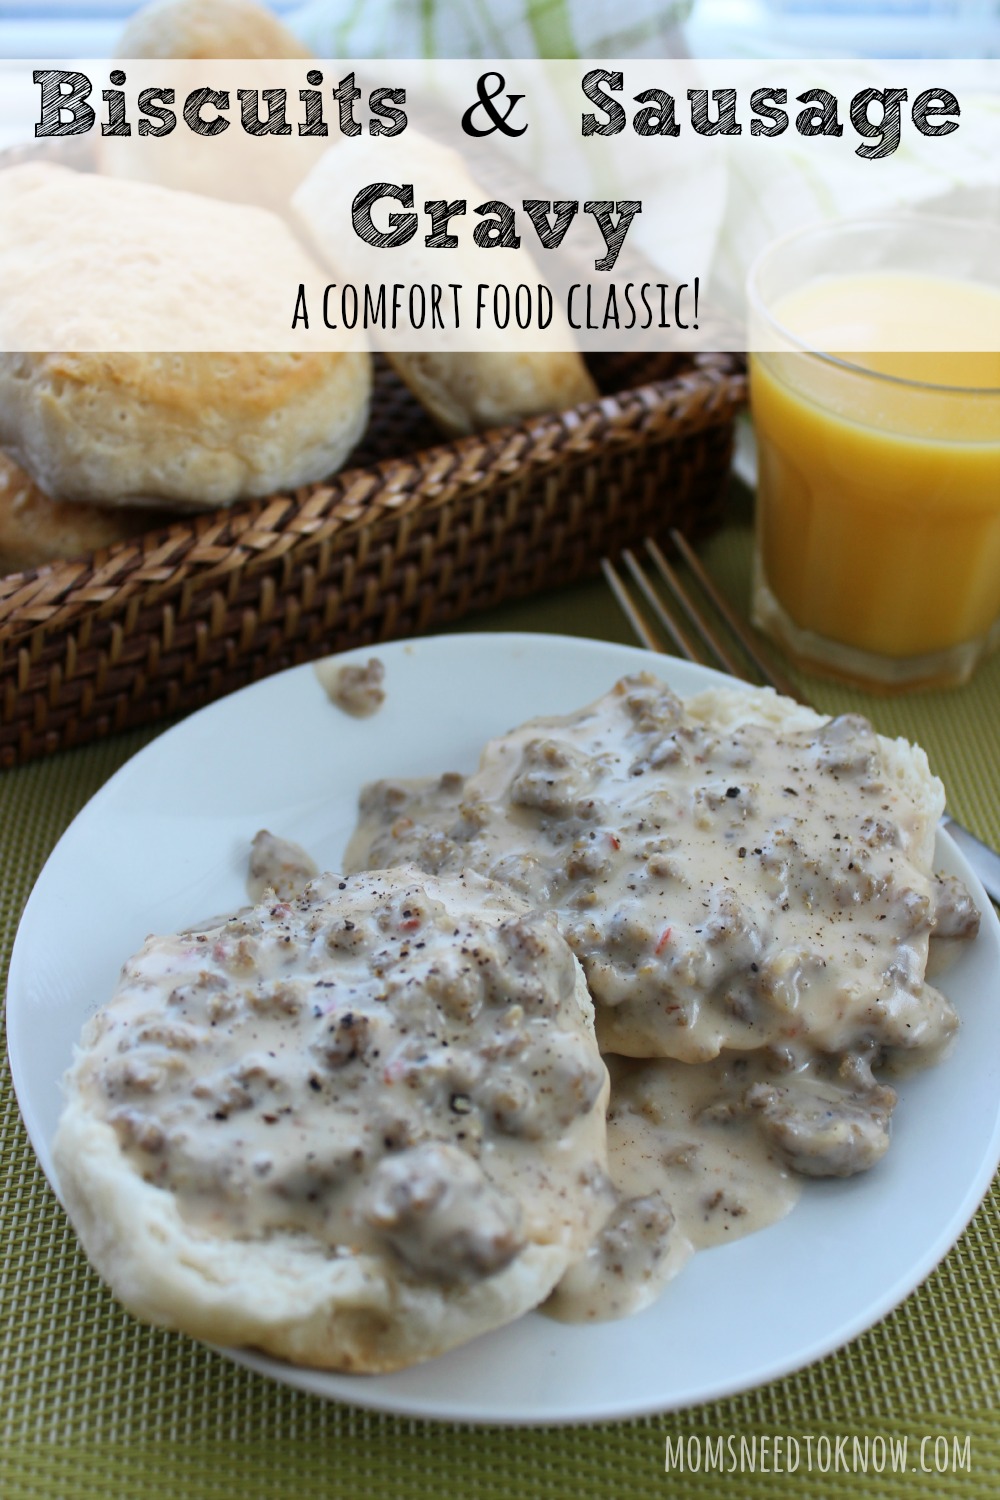 Biscuits and Sausage Gravy Recipe - A Comfort Food Classic